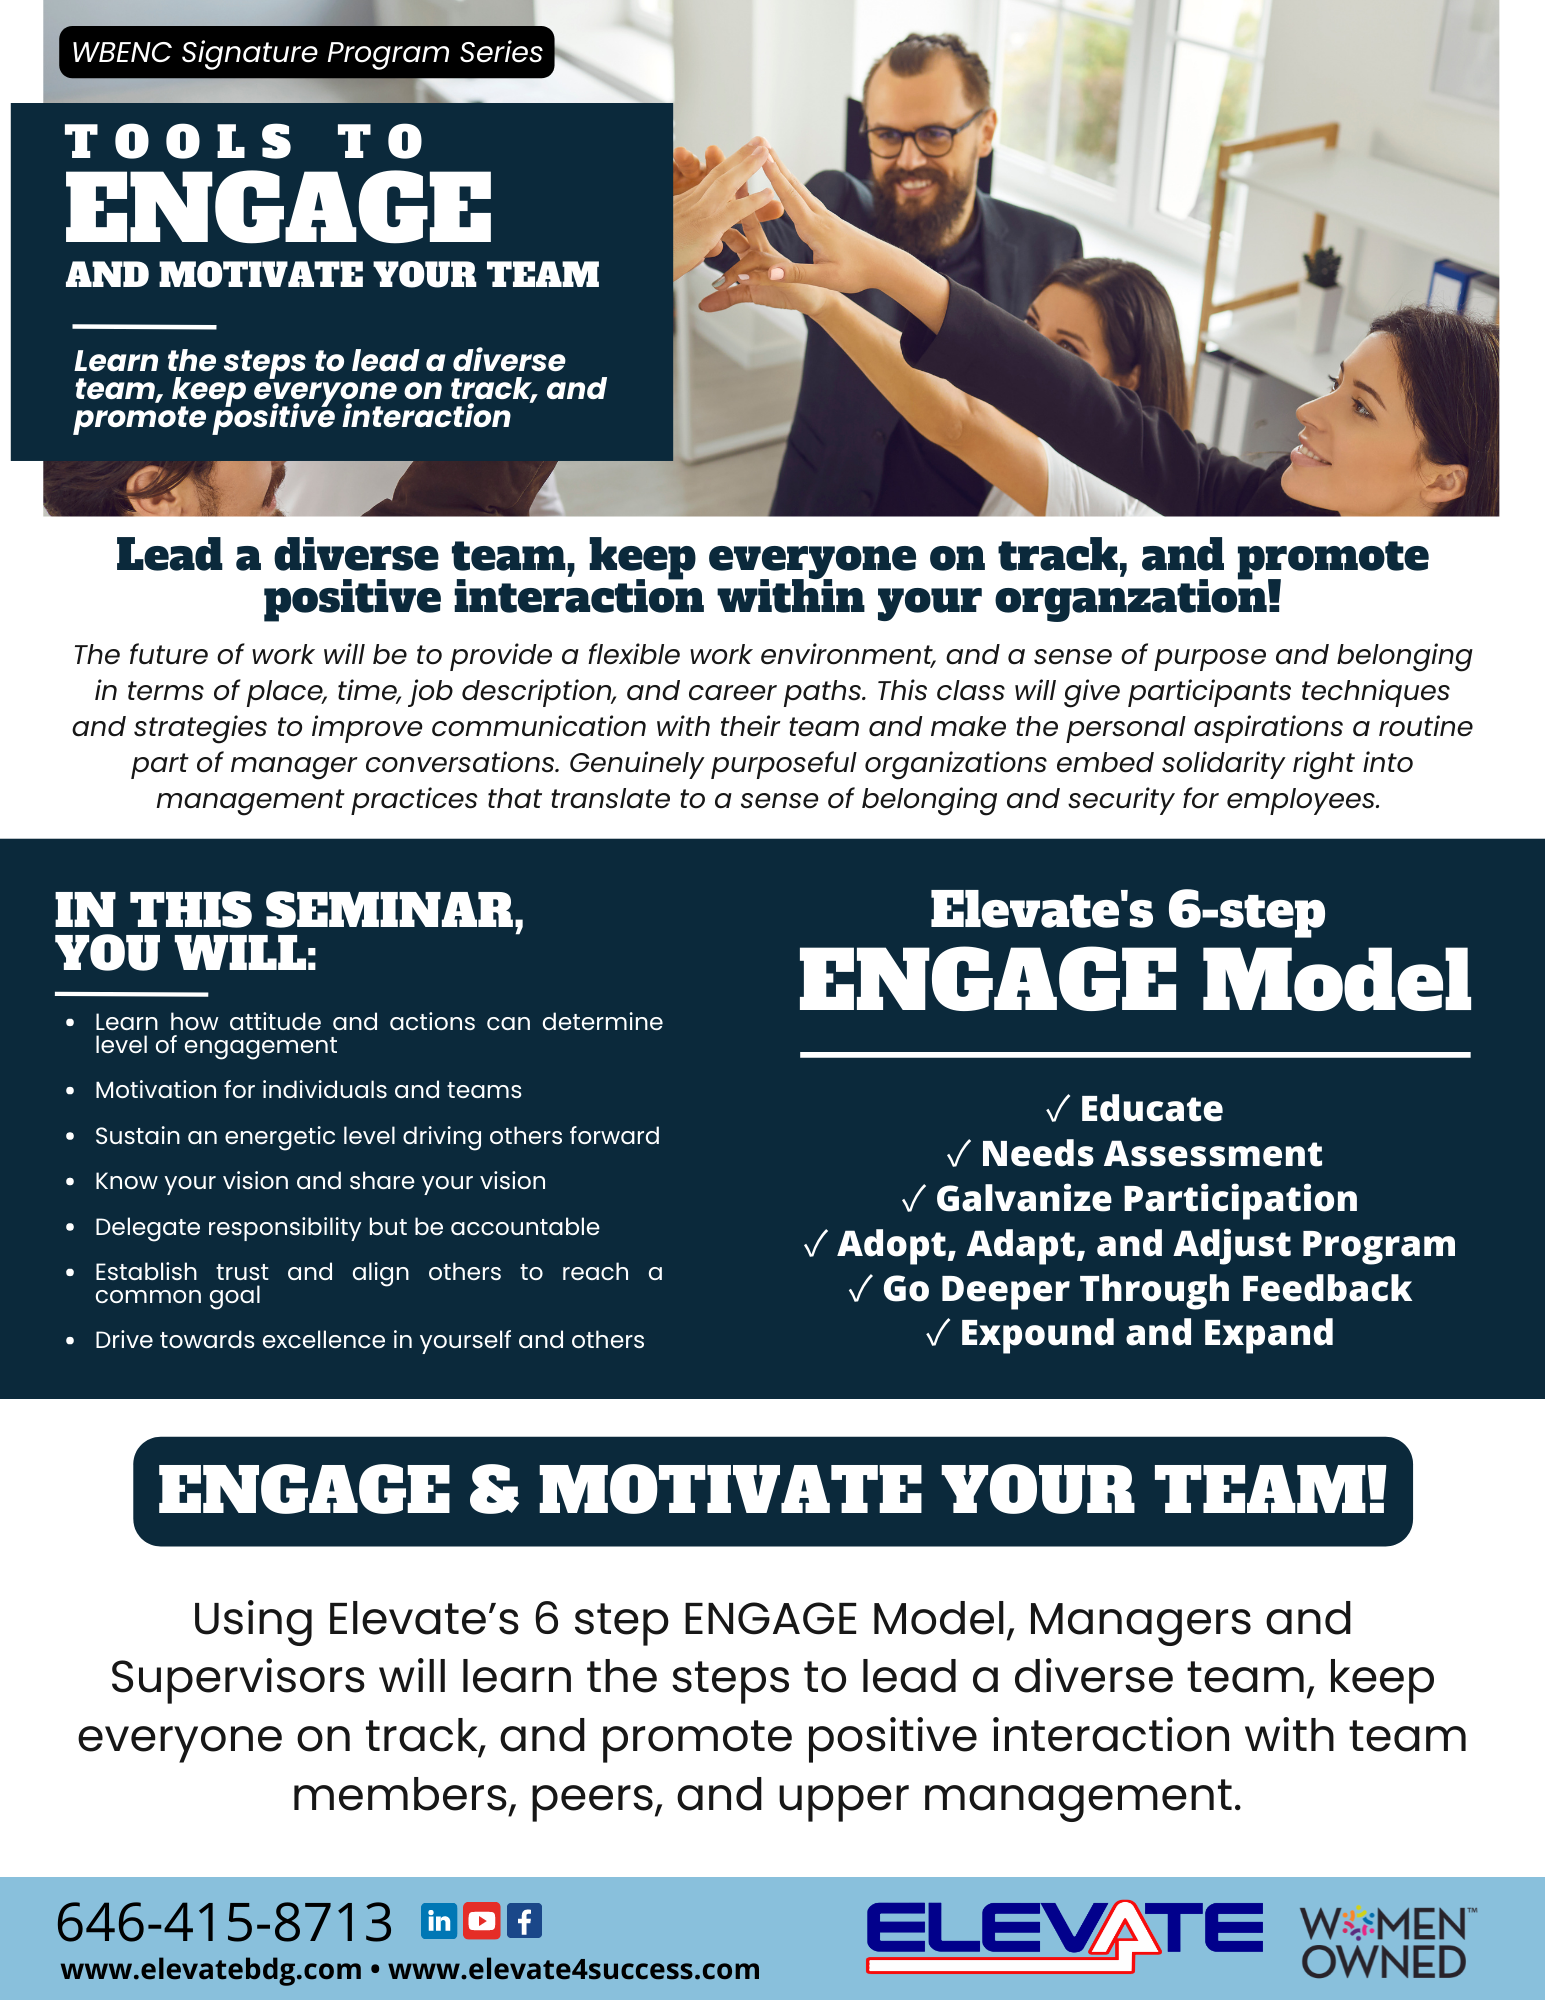 Tools to ENGAGE and Motivate your Team